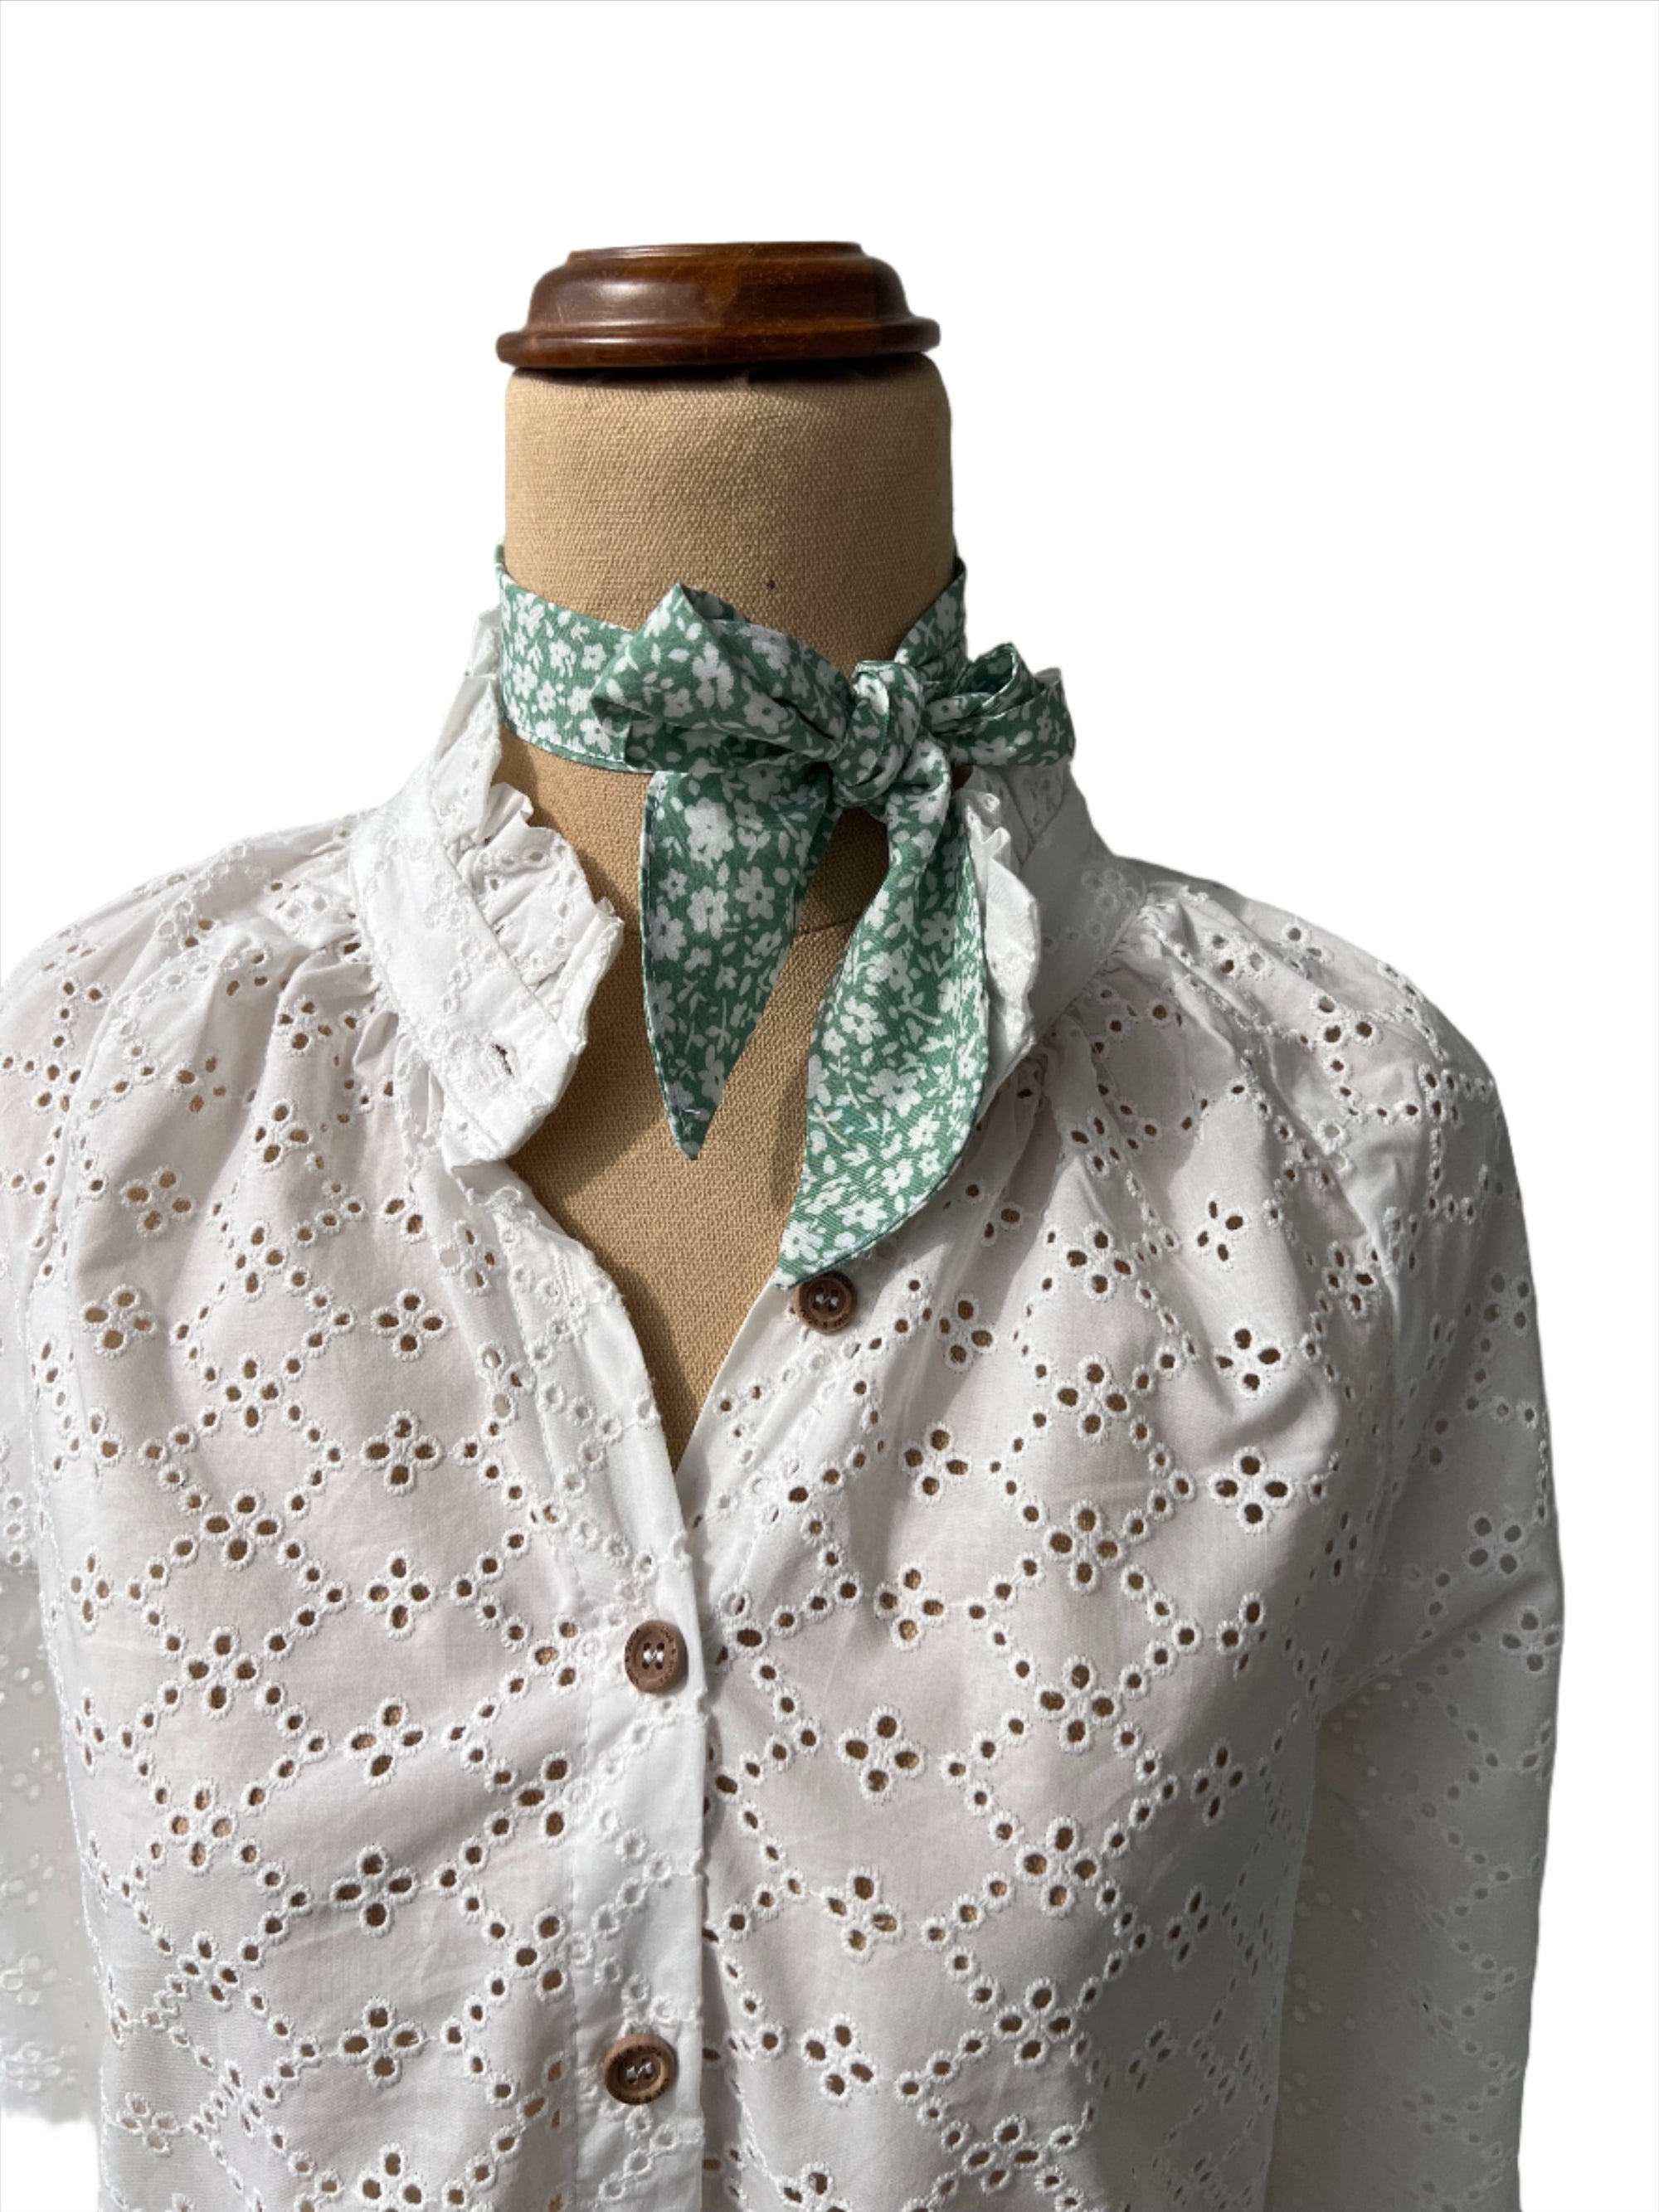 Neck Tie - Green with White Flowers